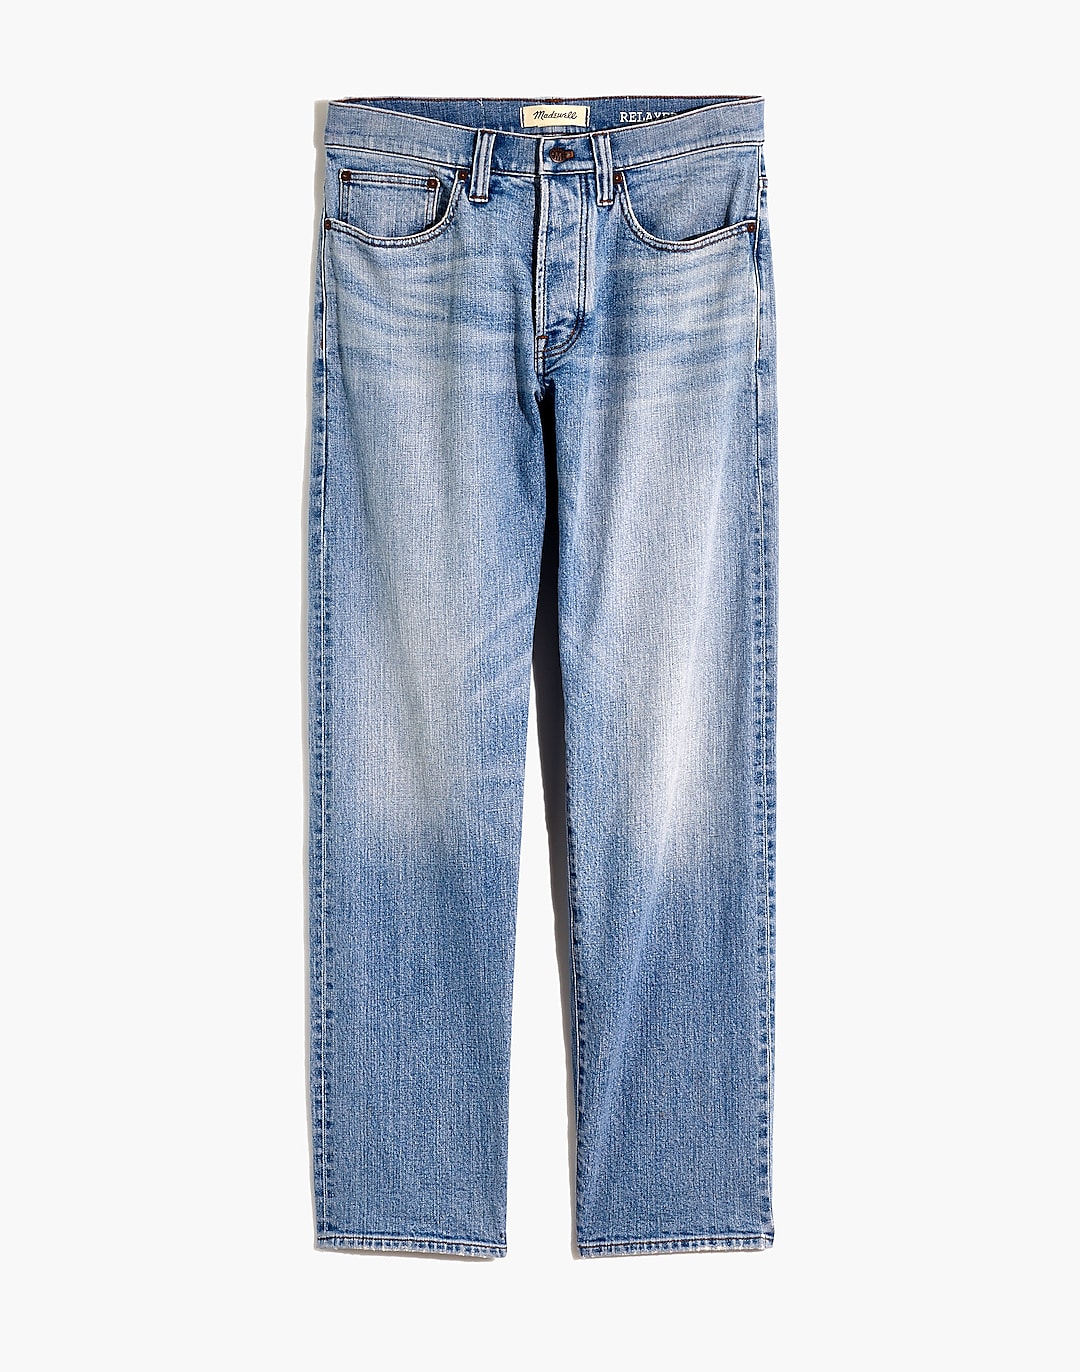 Relaxed Straight Authentic Flex Selvedge Jeans in Wyndham Wash